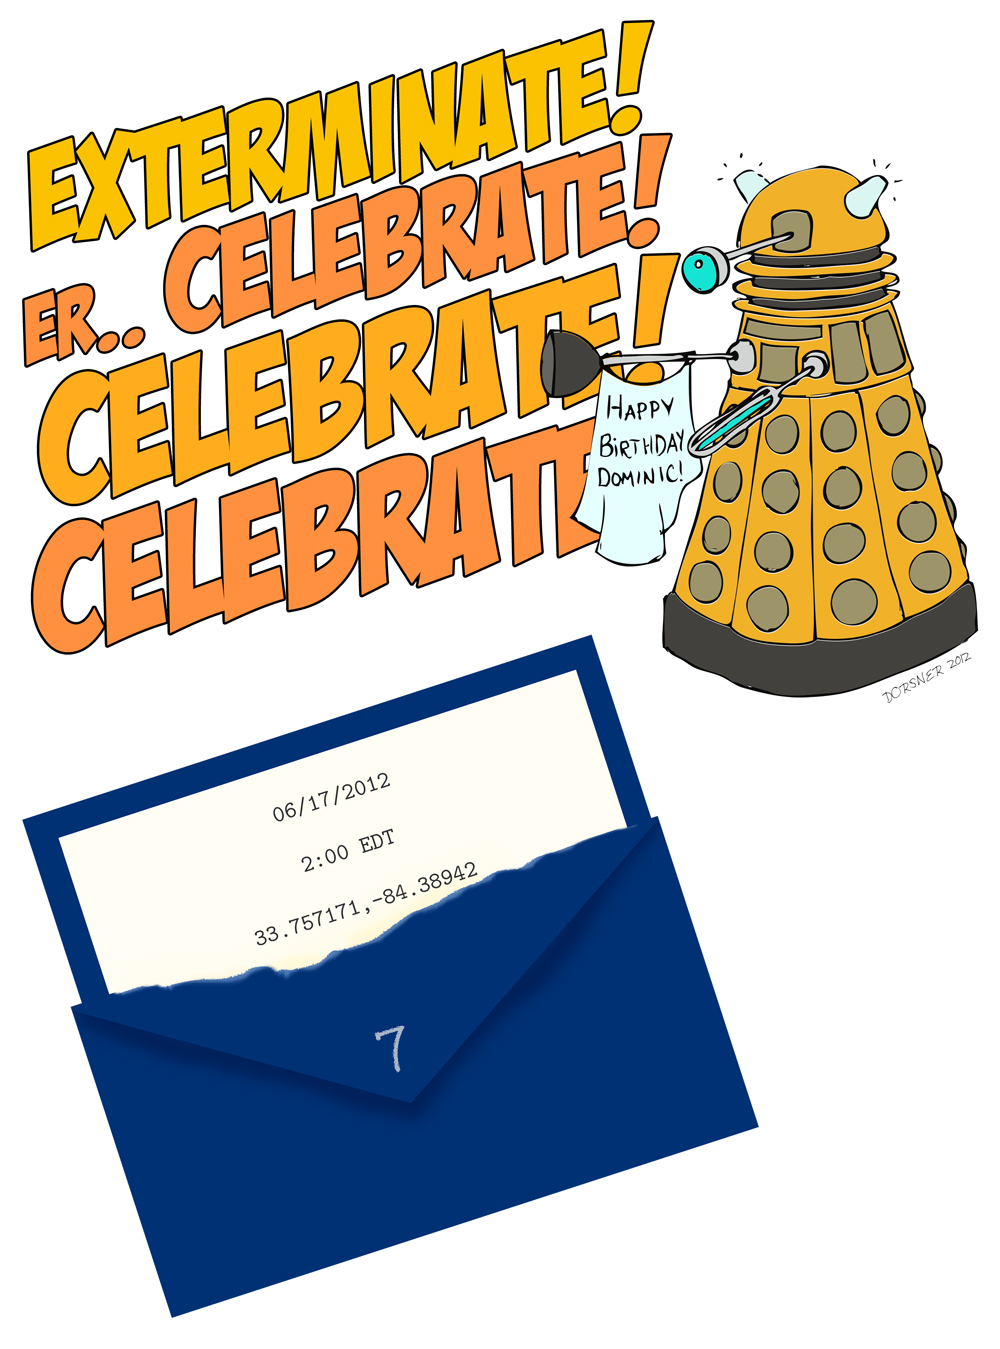 Dr. Who Birthday Party Invitation (Downloadable Template, Too - Doctor Who Party Invitations Printable Free